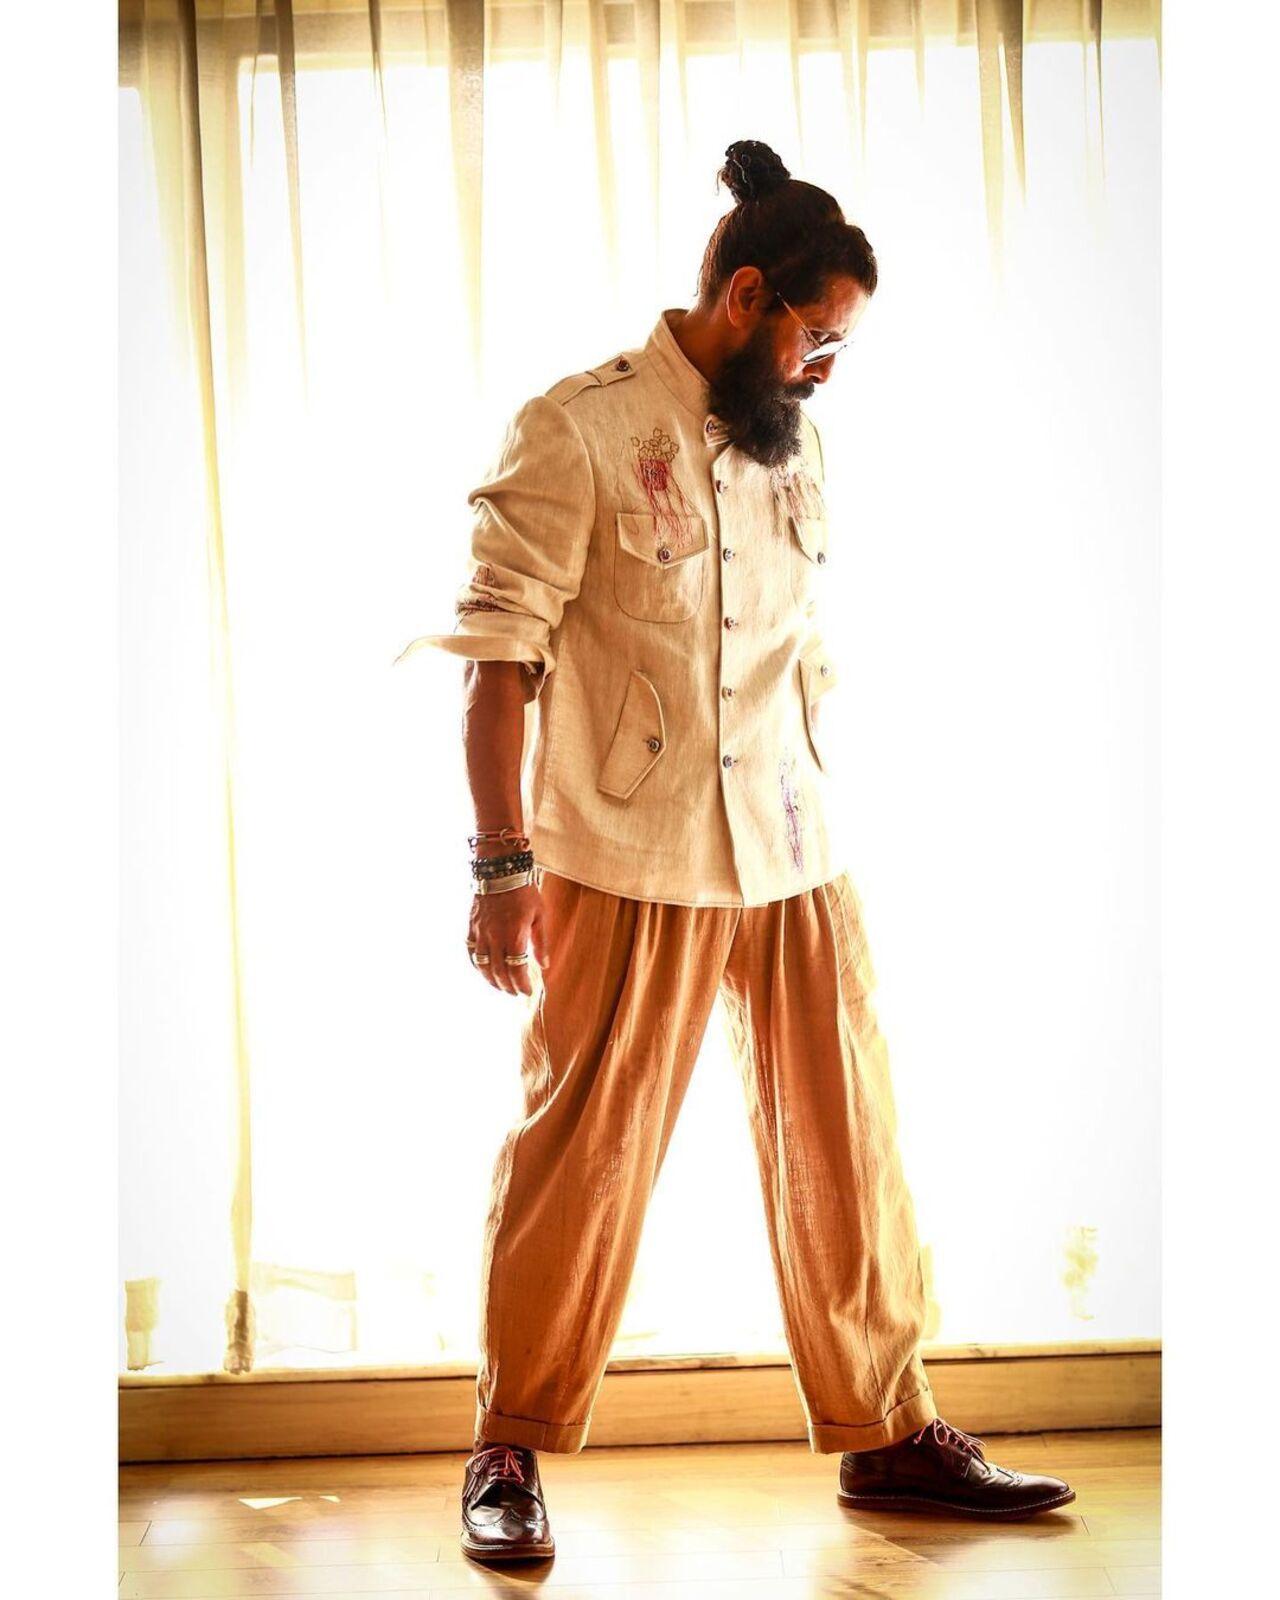 Vikram gives boho vibes in this cream bandh gala with multiple pockets and loose comfortable pants